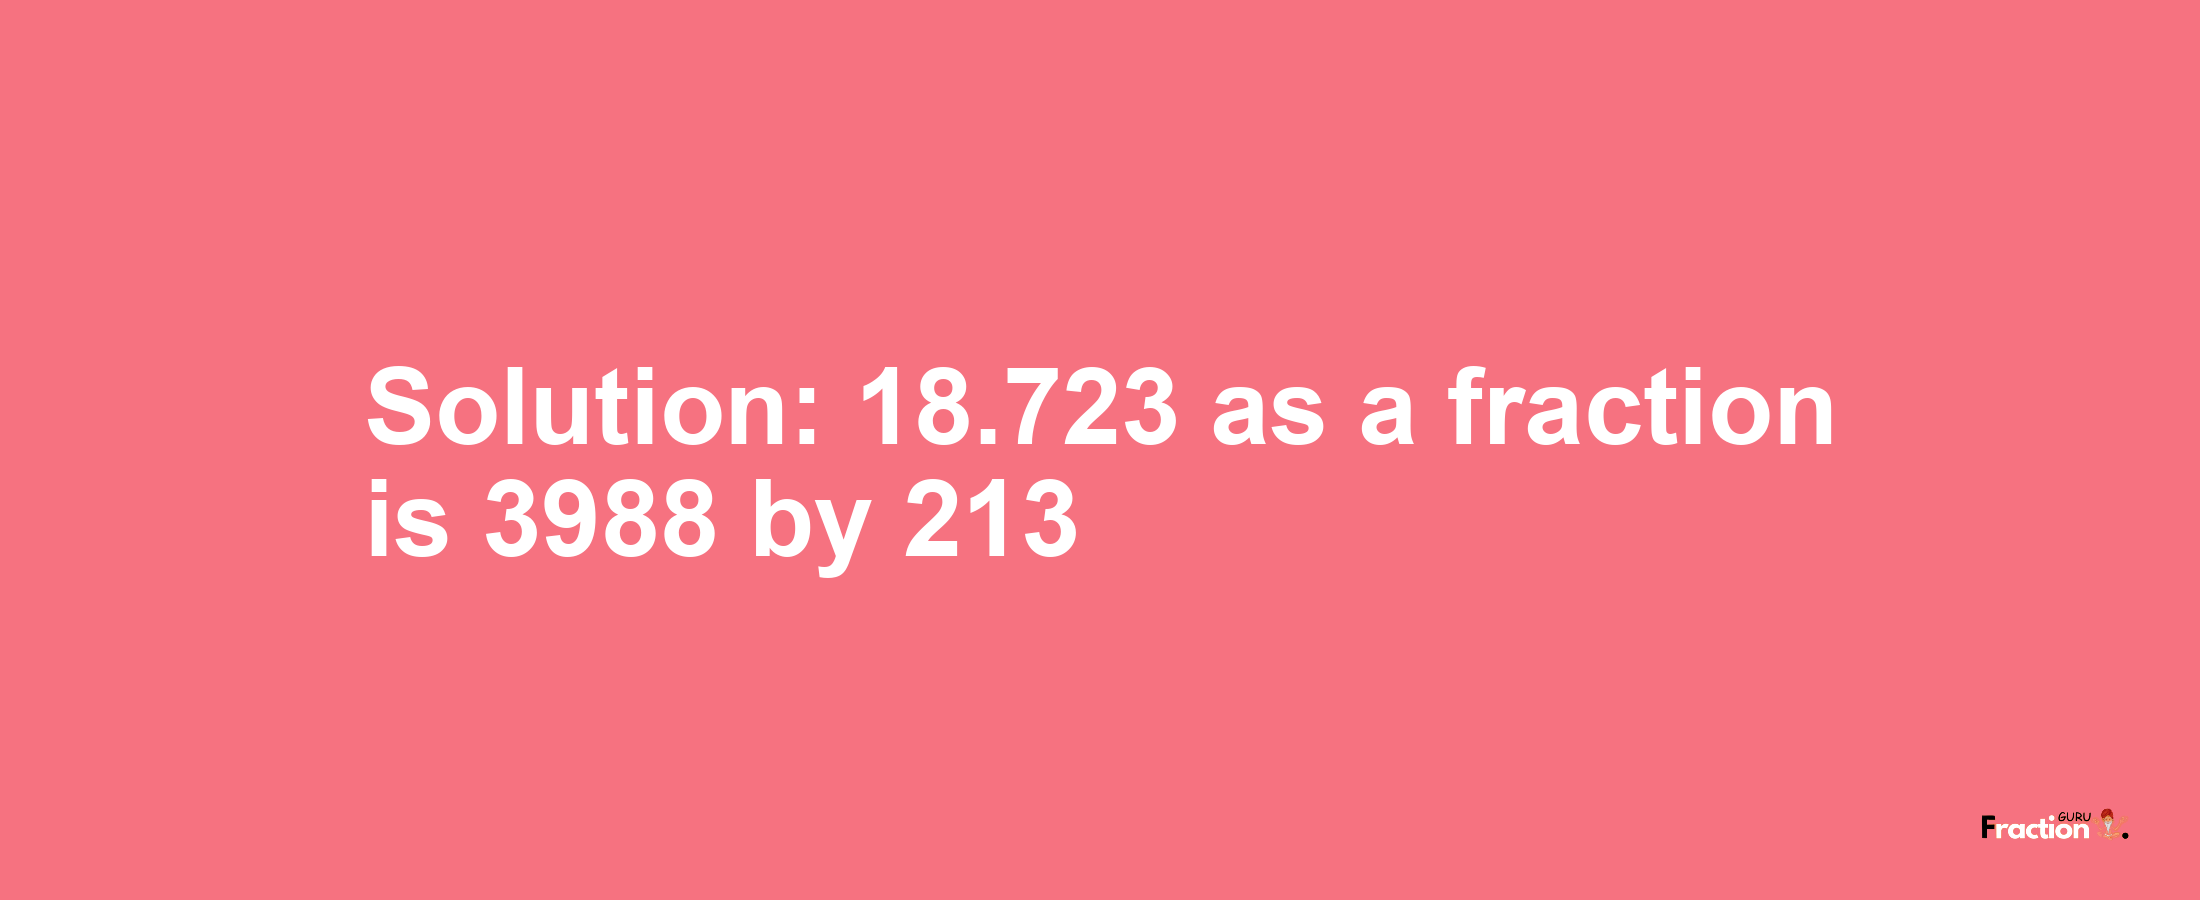 Solution:18.723 as a fraction is 3988/213